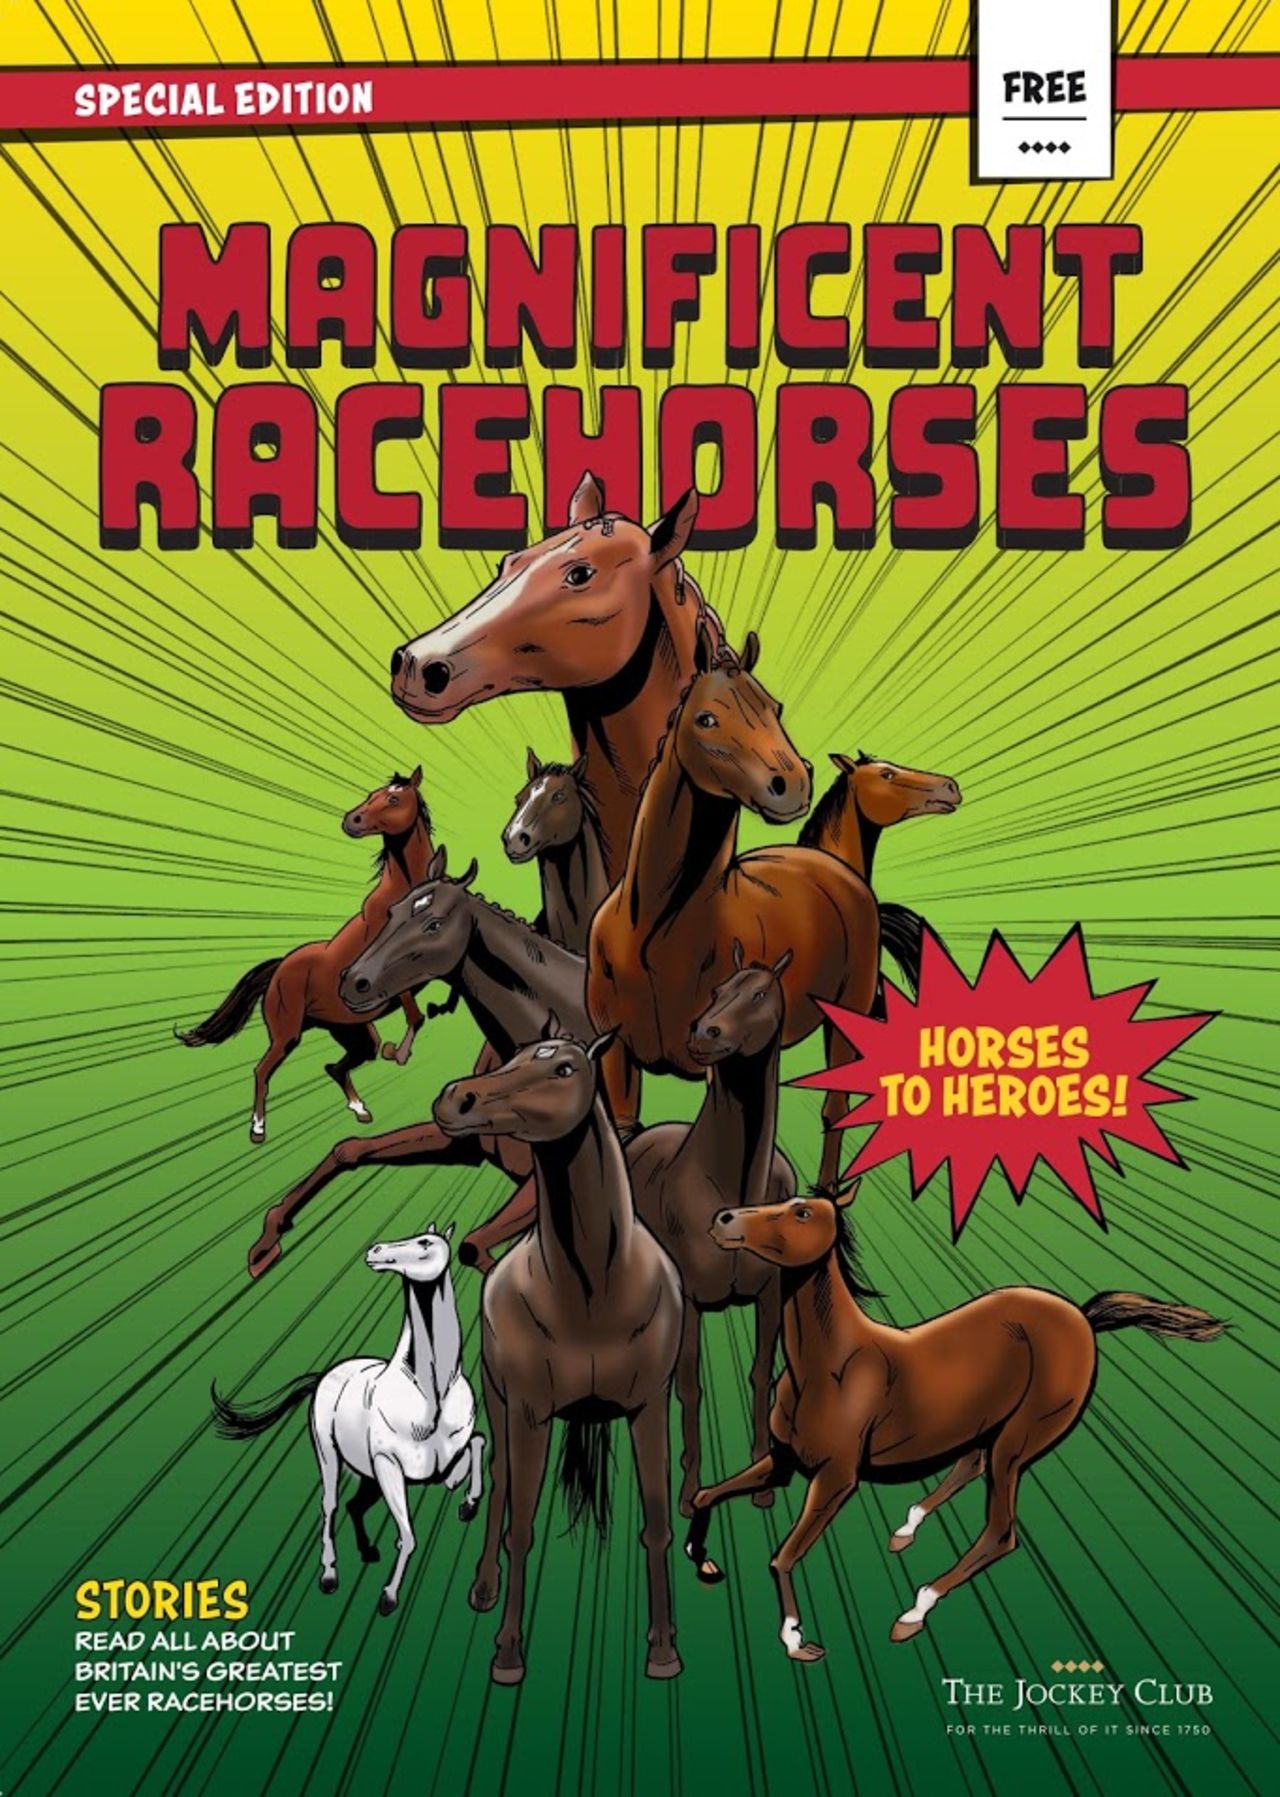 Marvel artists Martin Griffiths and Simon Furman have turned Britain's racehorse legends into superheroes with their very own comic book, joining the likes of Spider-Man, Captain Marvel and Black Panther.